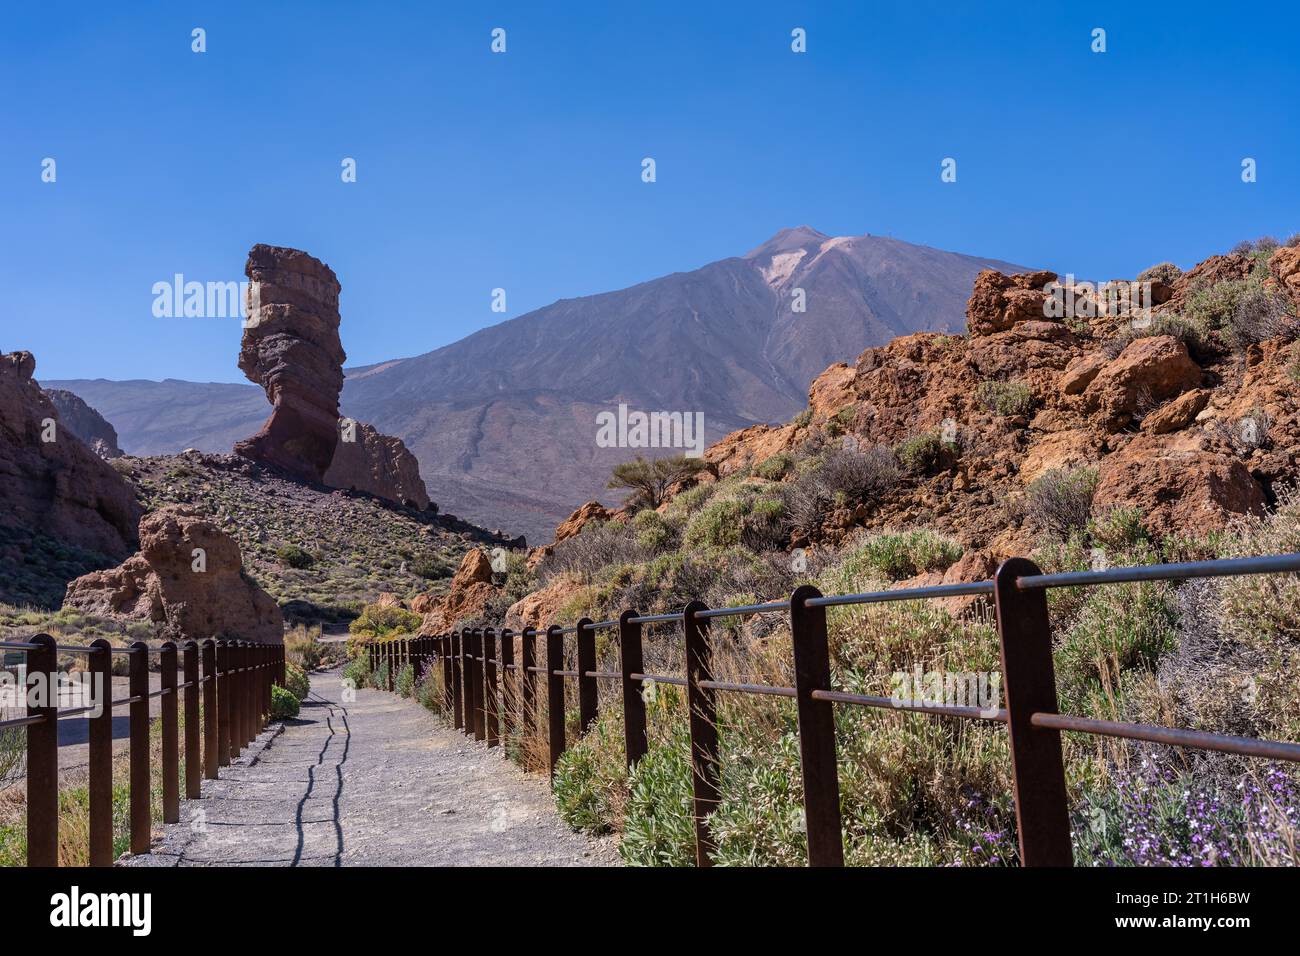 Very simple tourist path between Roques de Gracia and Roque Cinchado in the natural area of Teide in Tenerife, Canary Islands Stock Photo